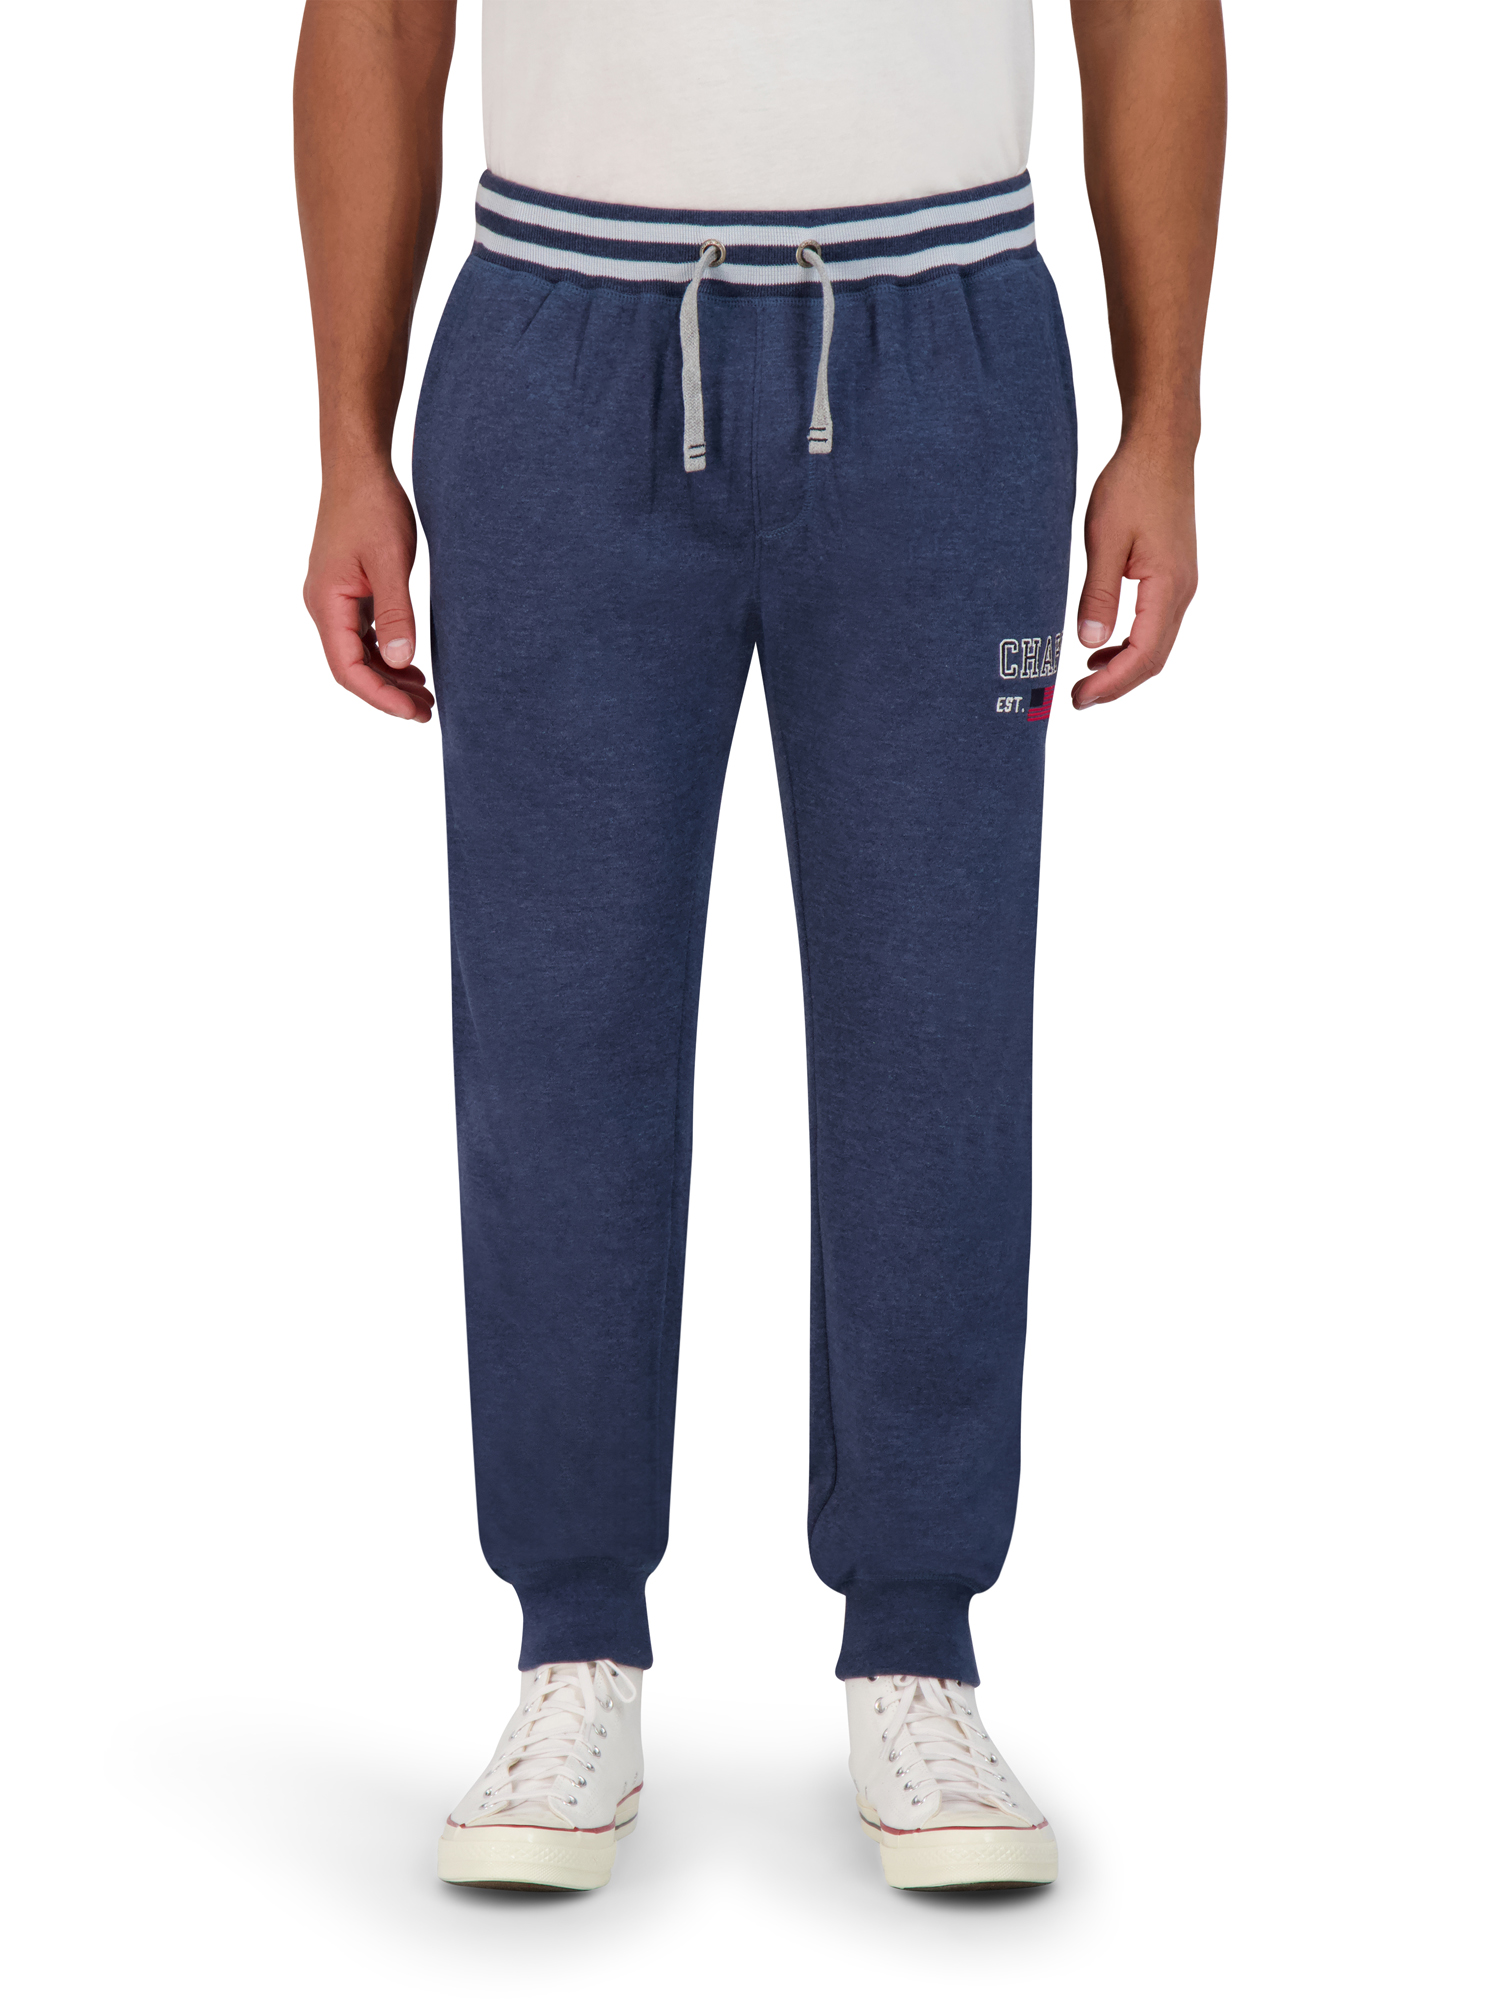 Chaps Men's Super Soft French Terry Jogger Sweatpants - image 1 of 2